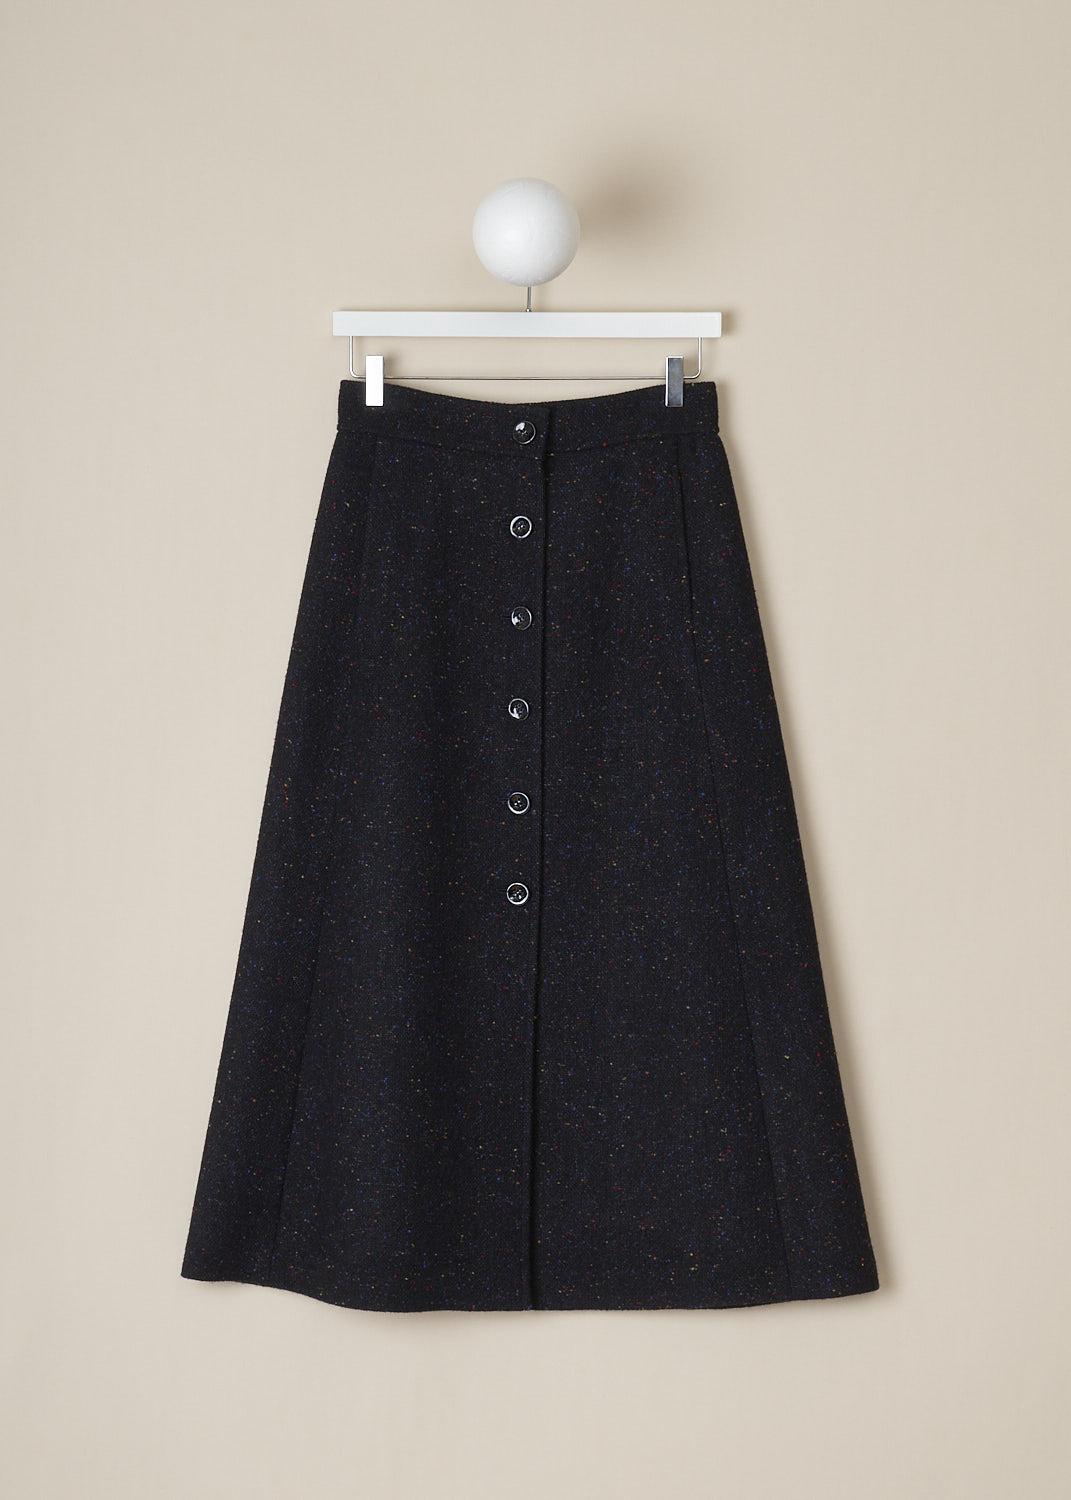 CHLOÃ‰, SPECKLED A-LINE SKIRT, CHC22AJU461654D2_ANTHRACITE_BLUE, Blue, Print, Grey, Front, This maxi A-line skirt has an anthracite blue base color with multicolored speckles throughout. The skirt has a front button closure. The skirt has slanted pockets. ,
